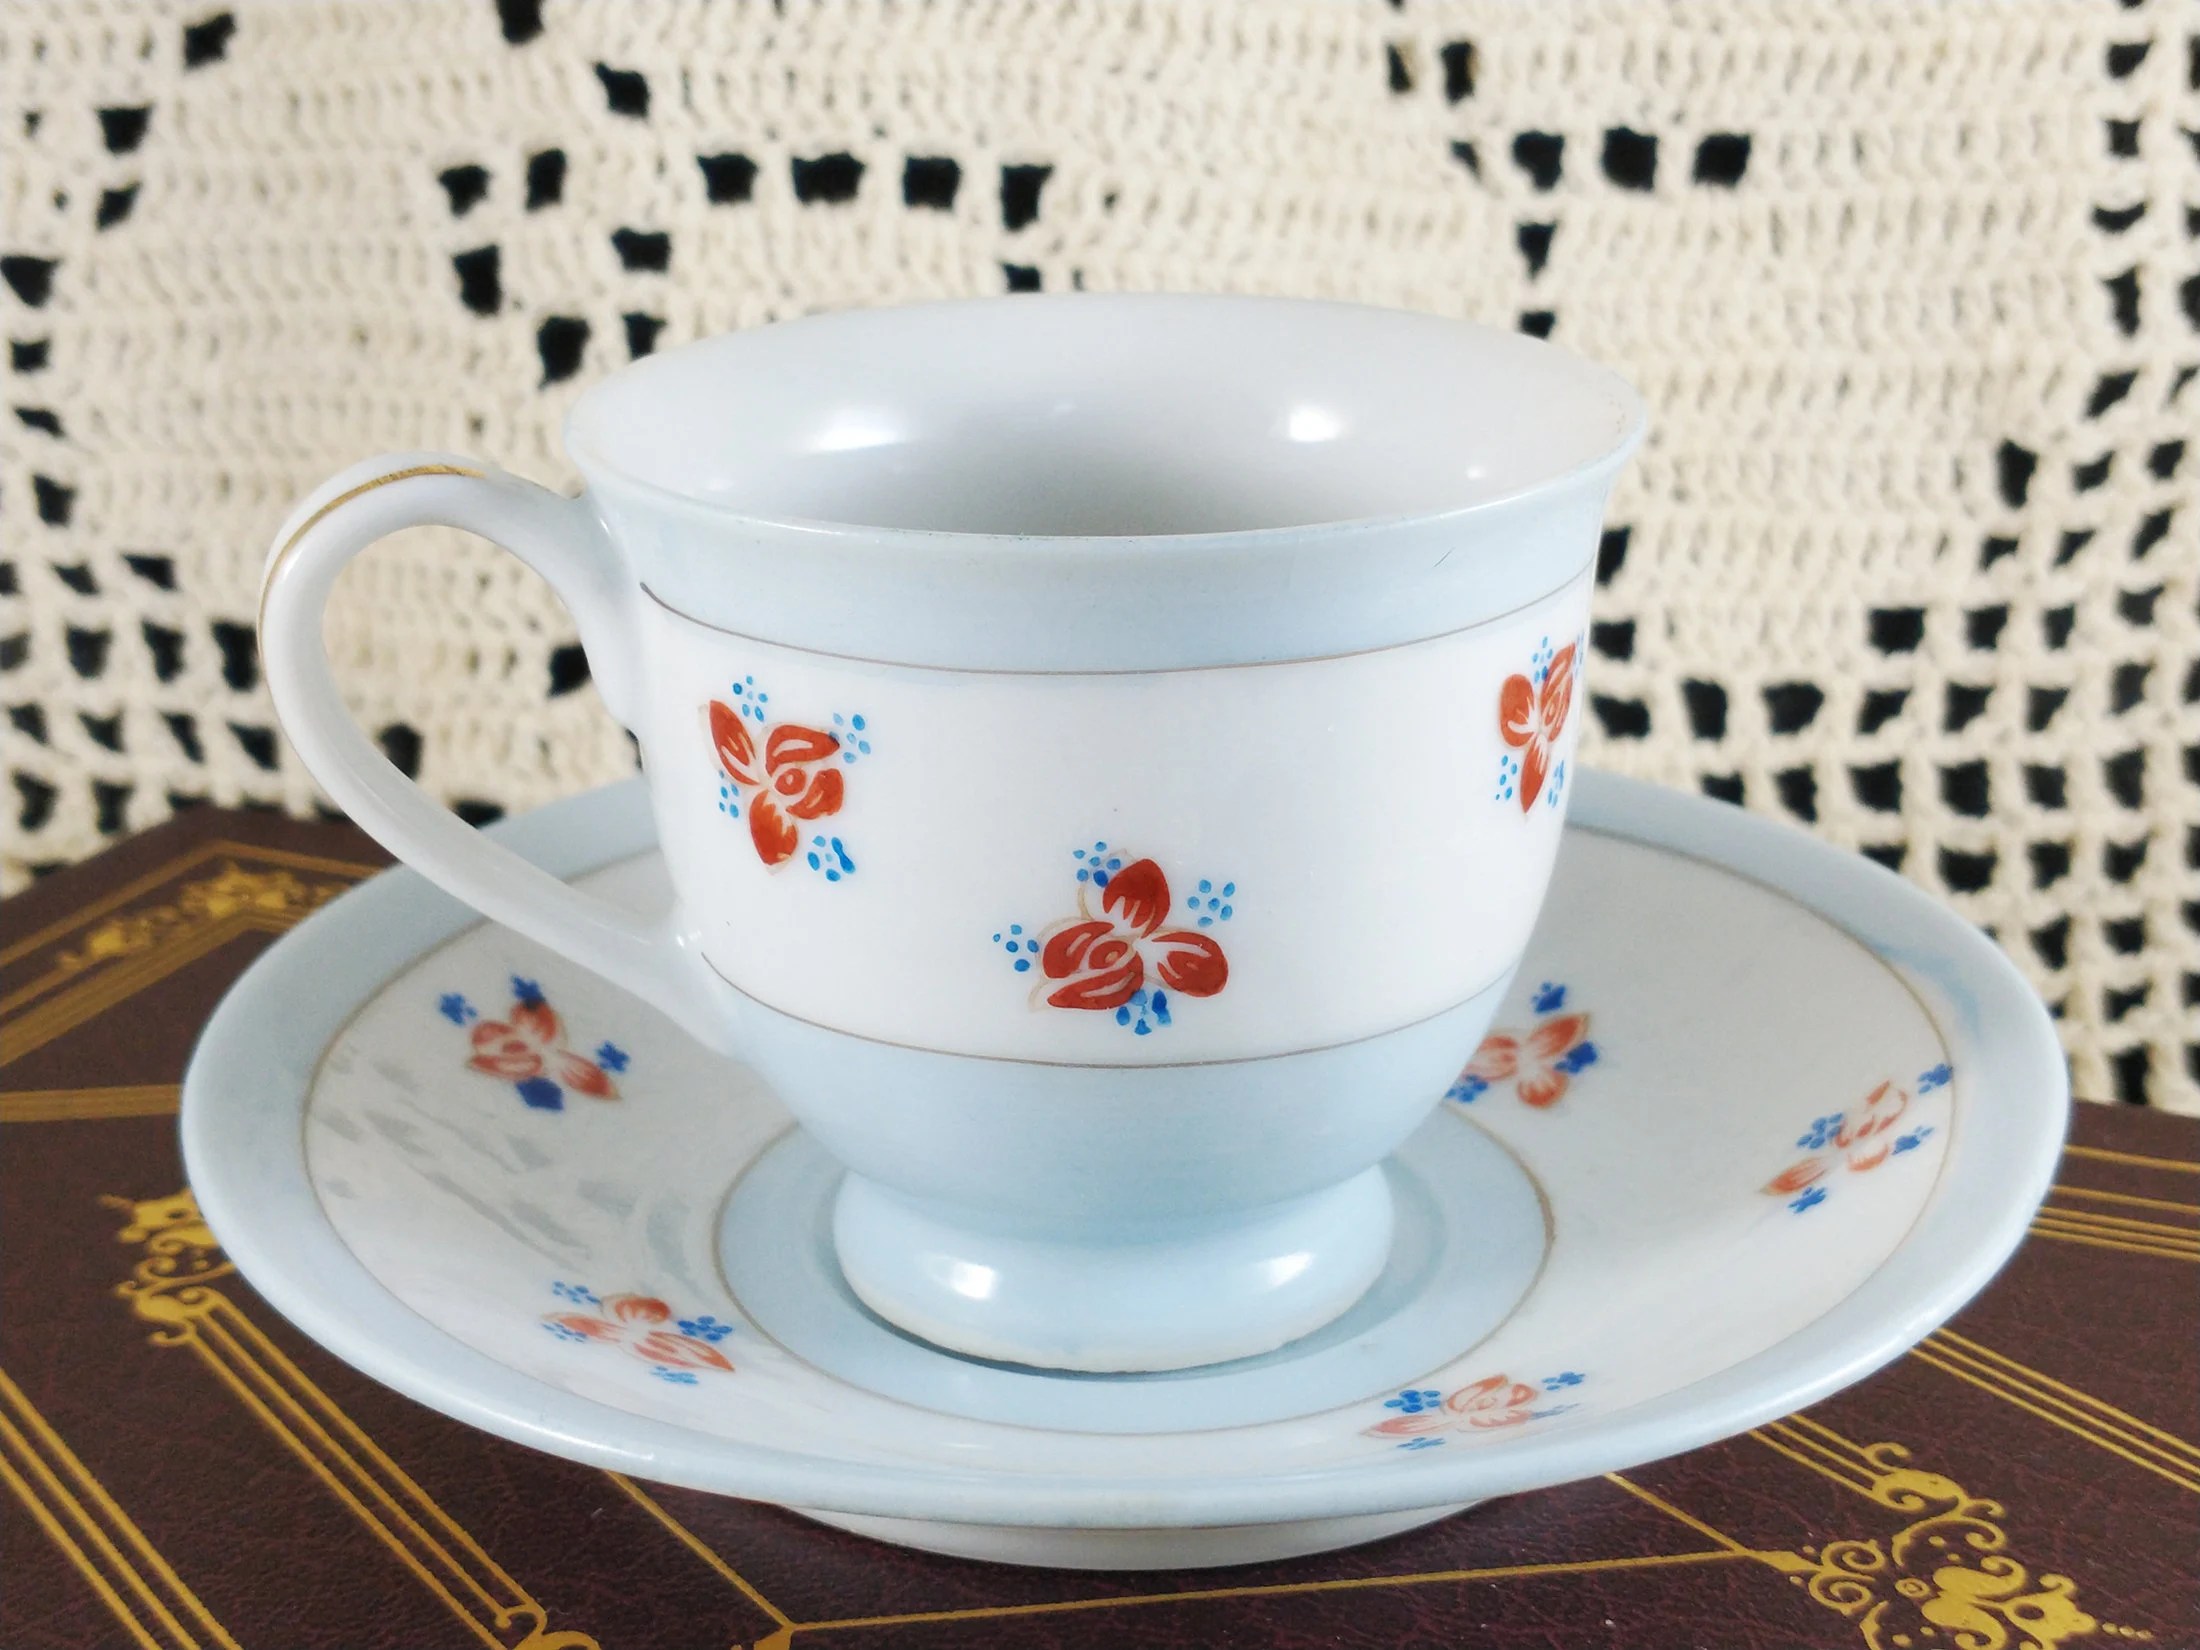 Occupied Japan 1947-1951 Hand Painted Light Blue, Red, White Floral Porcelain Demitasse Tea Cup & Saucer Set - Country, Cottage, Farmhouse